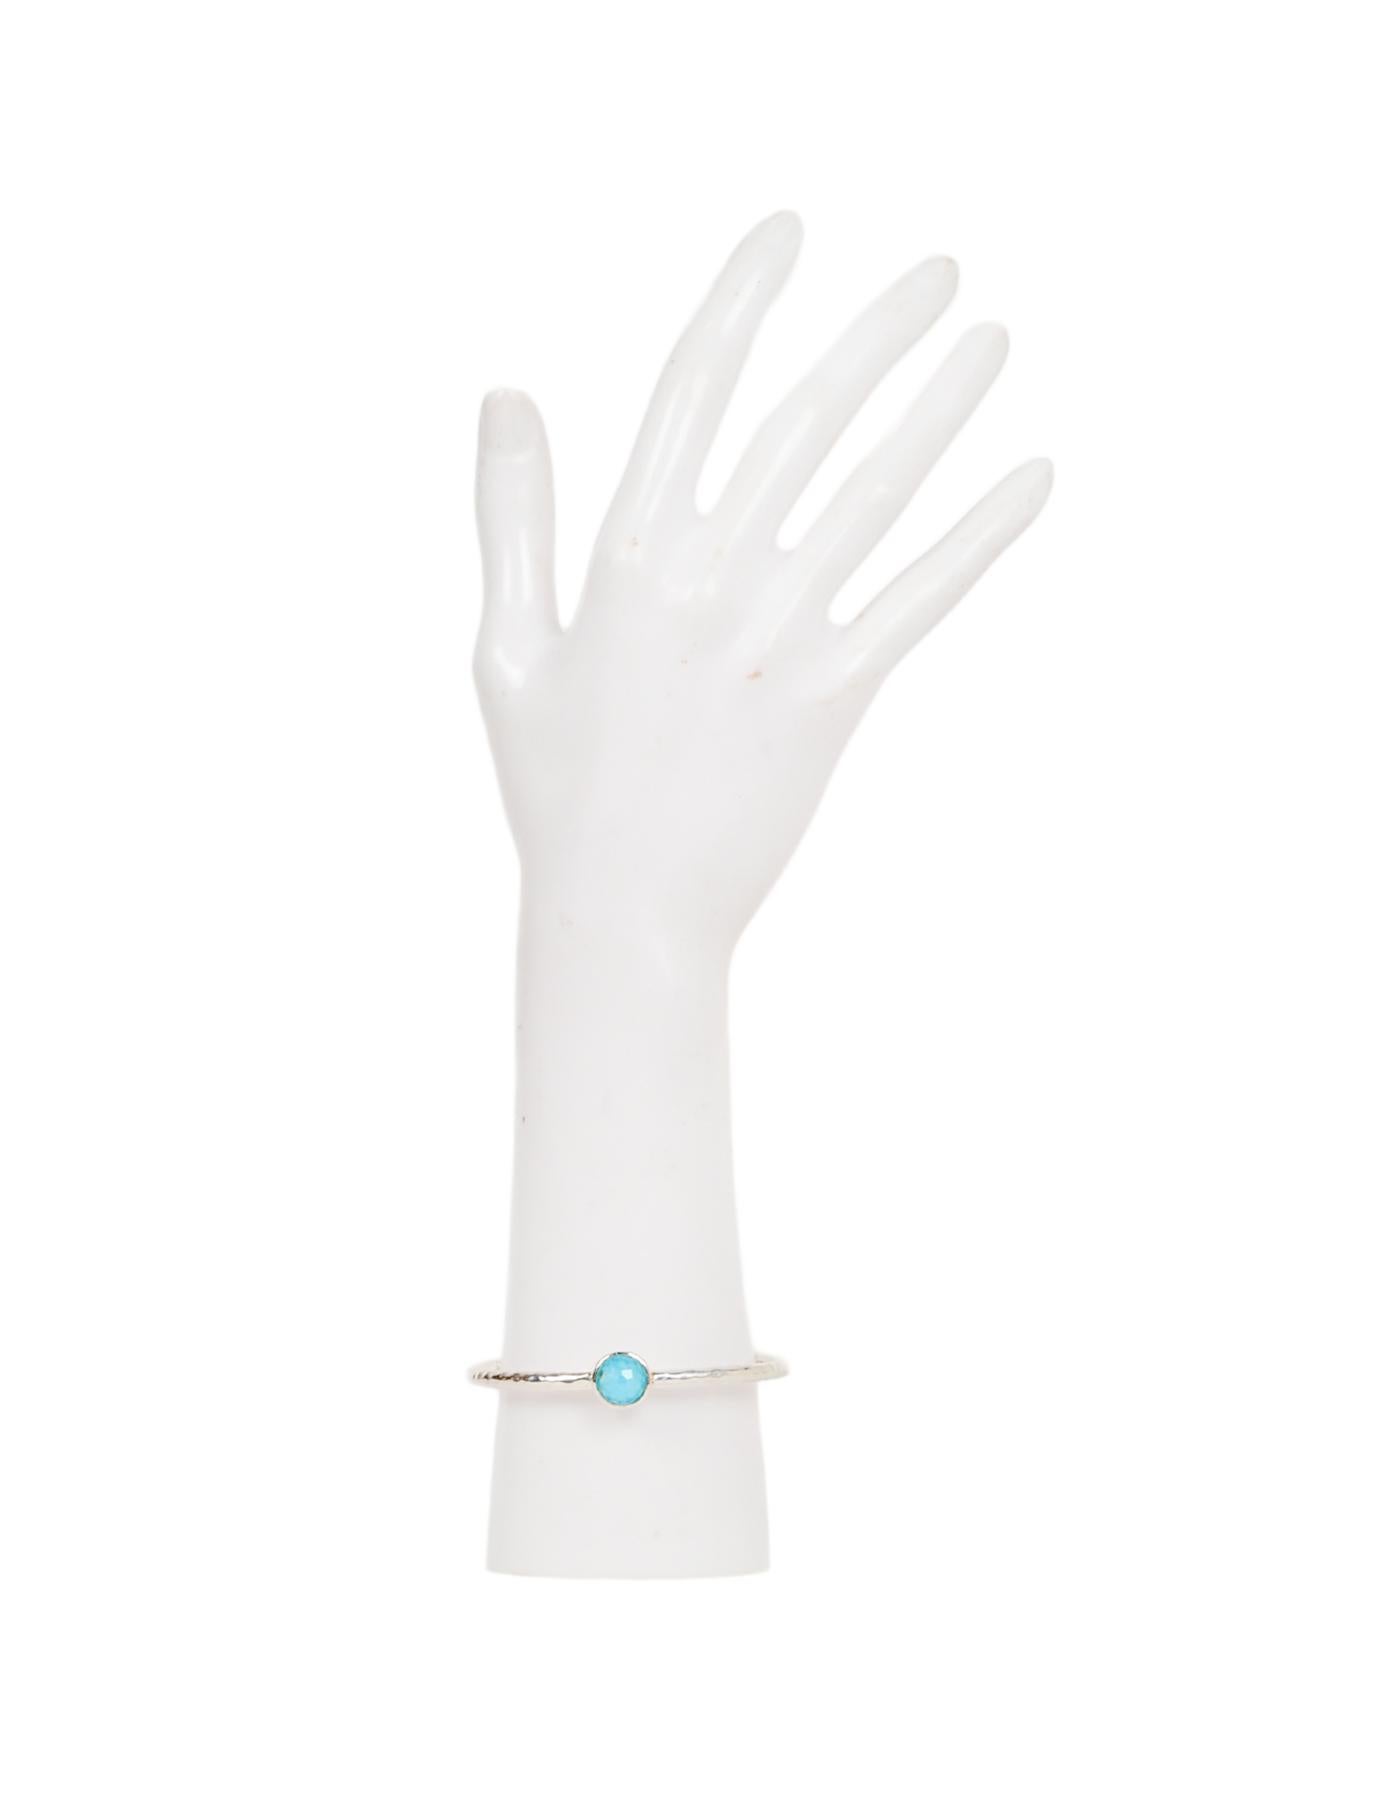 Ippolita Hammered Sterling Silver/Turquoise Quartz Doublet Rock Candy Hinged Bangle Bracelet
Color: Silver
Materials: Sterling silver
Hallmarks: Ippolita 925
Closure/Opening: Clasp
Overall Condition: Excellent pre-owned condition
Estimated Retail: